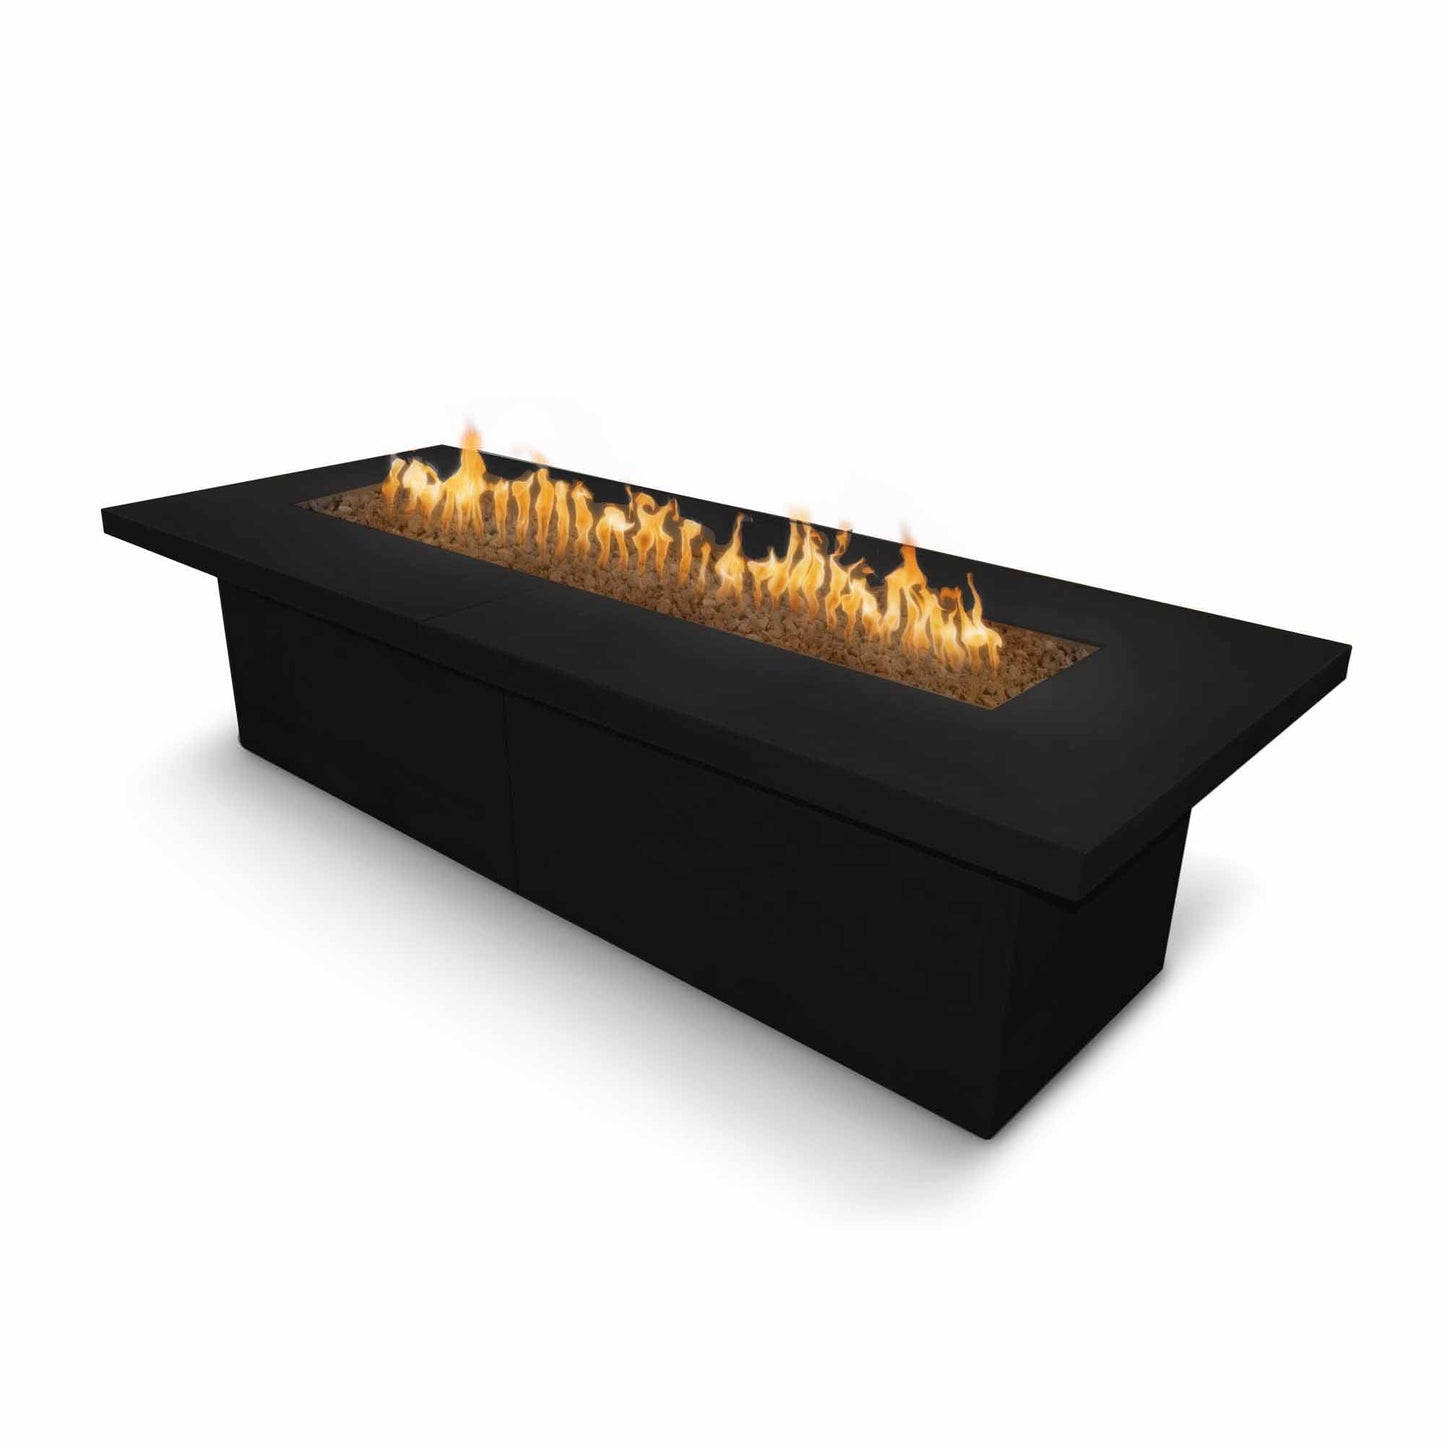 The Outdoor Plus Rectangular Newport 144" Stainless Steel Natural Gas Fire Pit with Match Lit Ignition